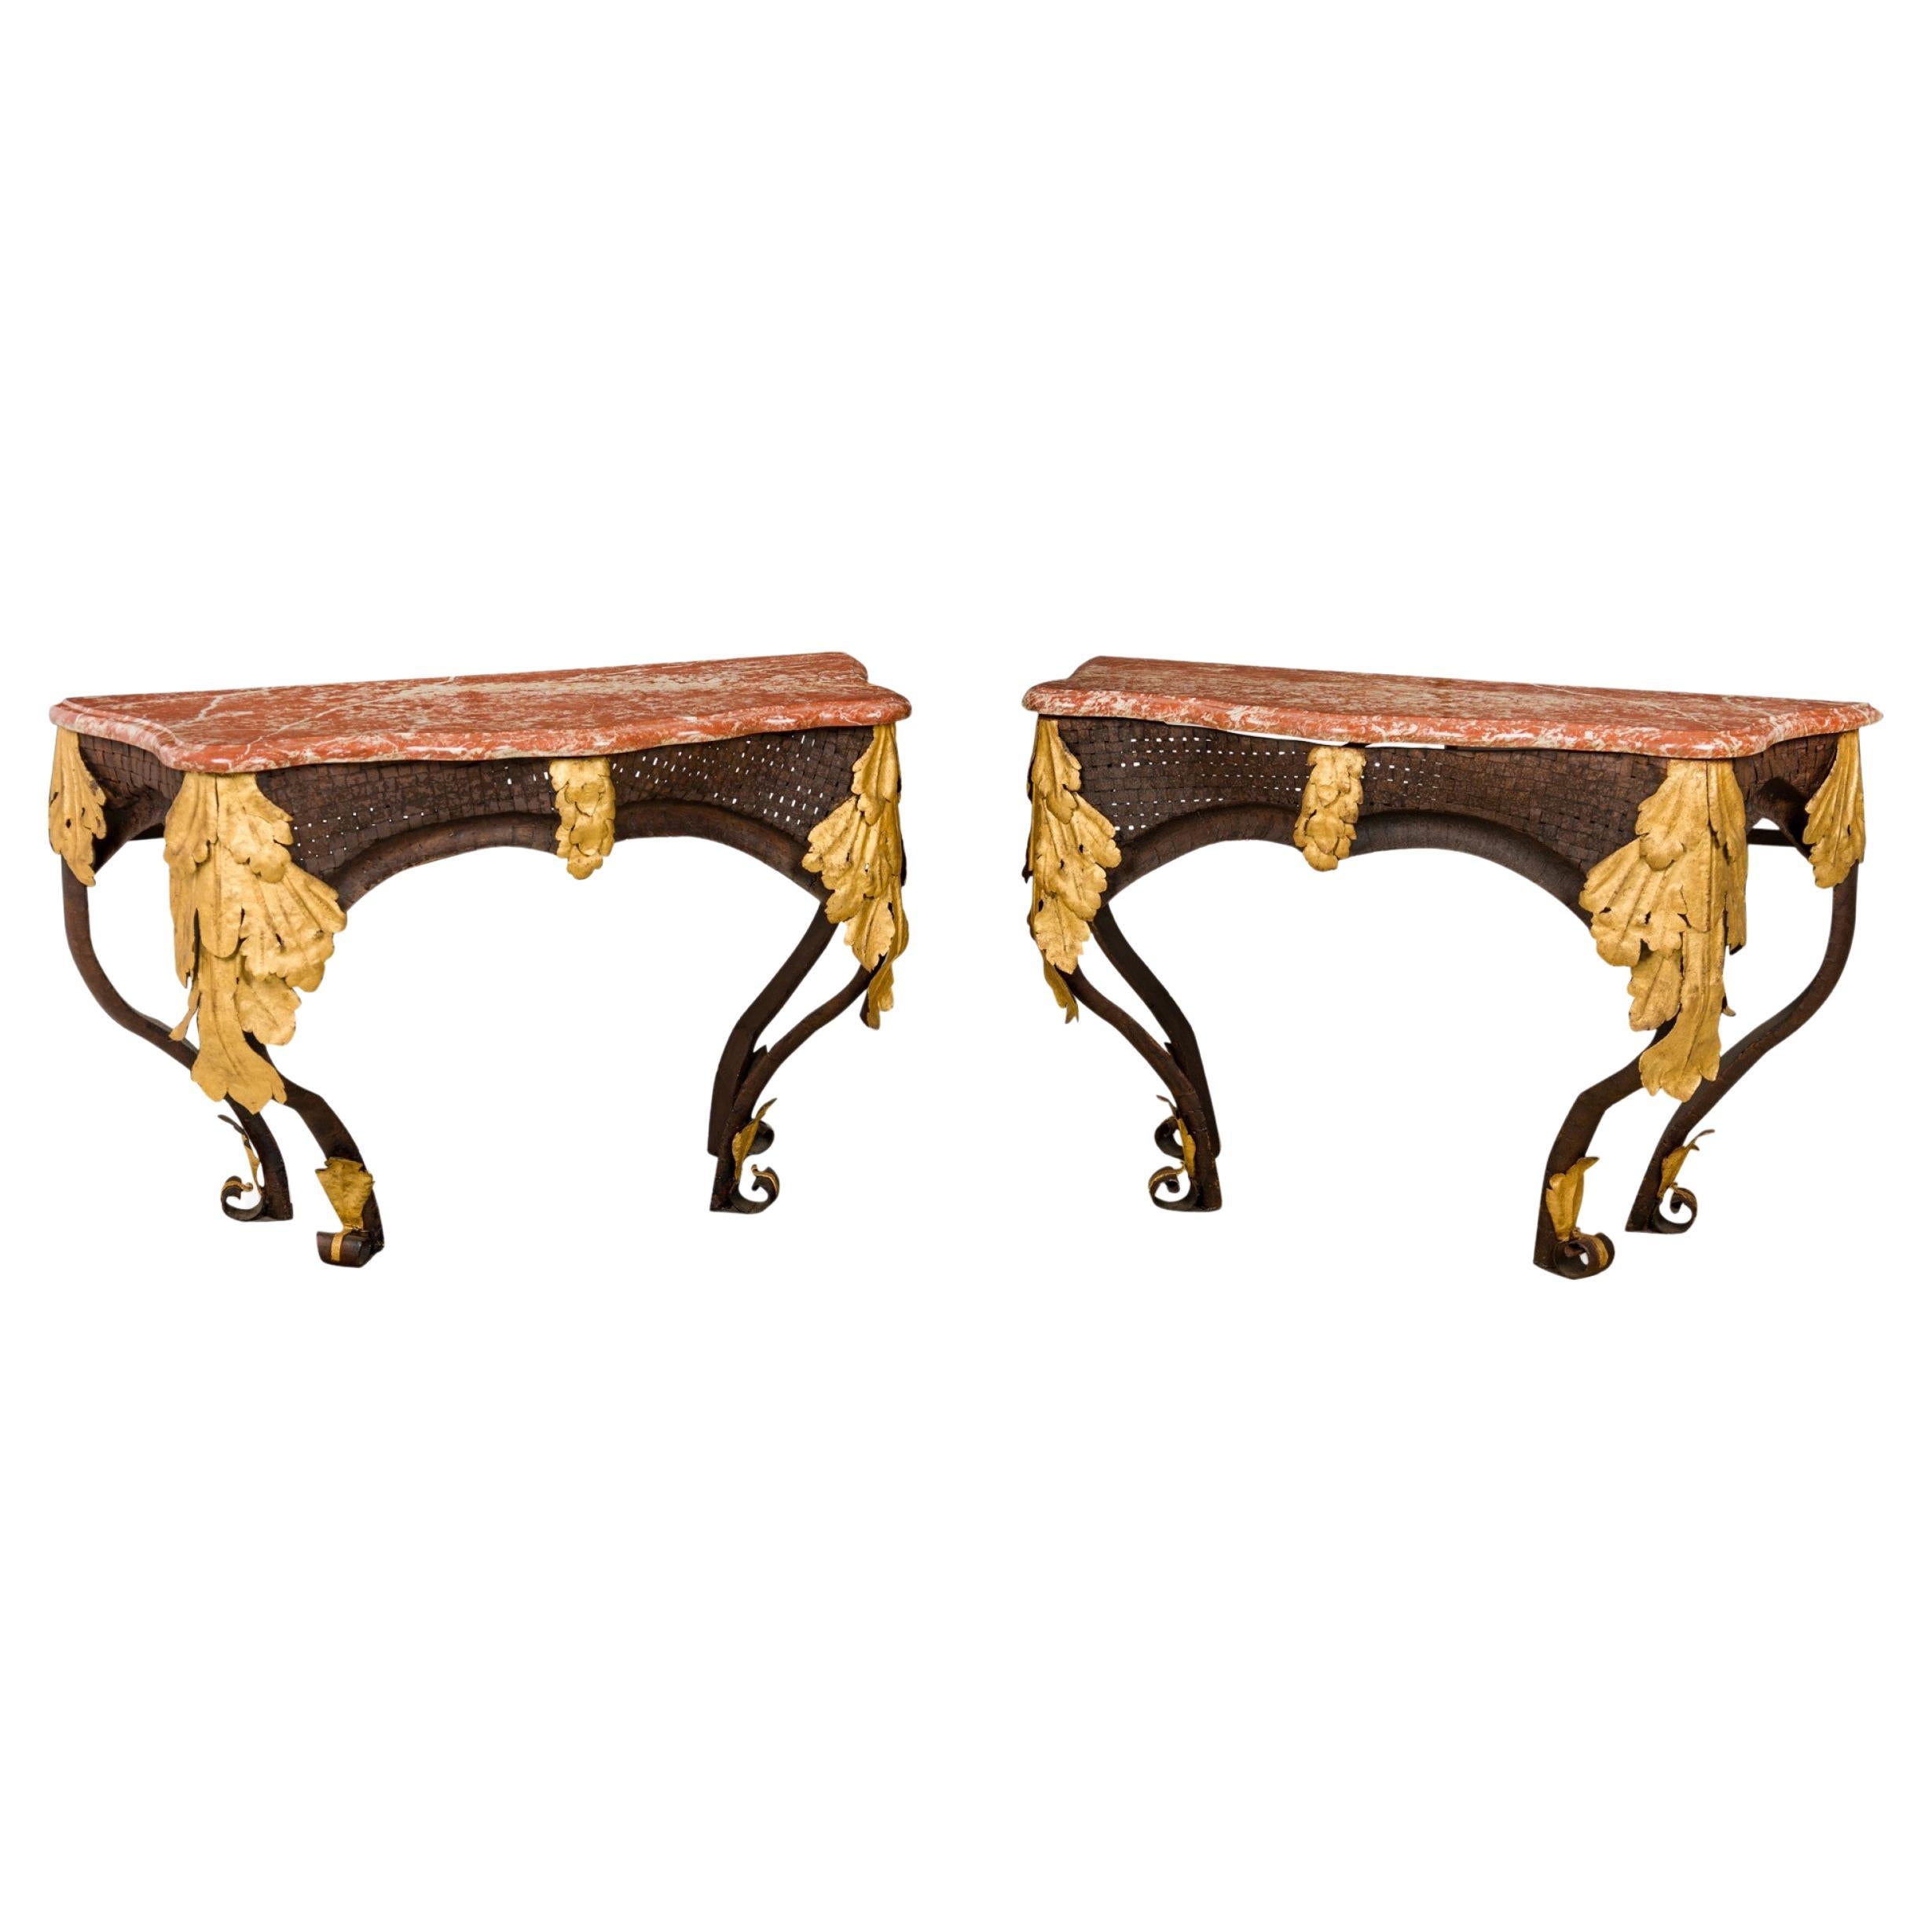 Pair of Art Deco Woven Wrought and Gilt Tole Blush Marble Top Console Tables